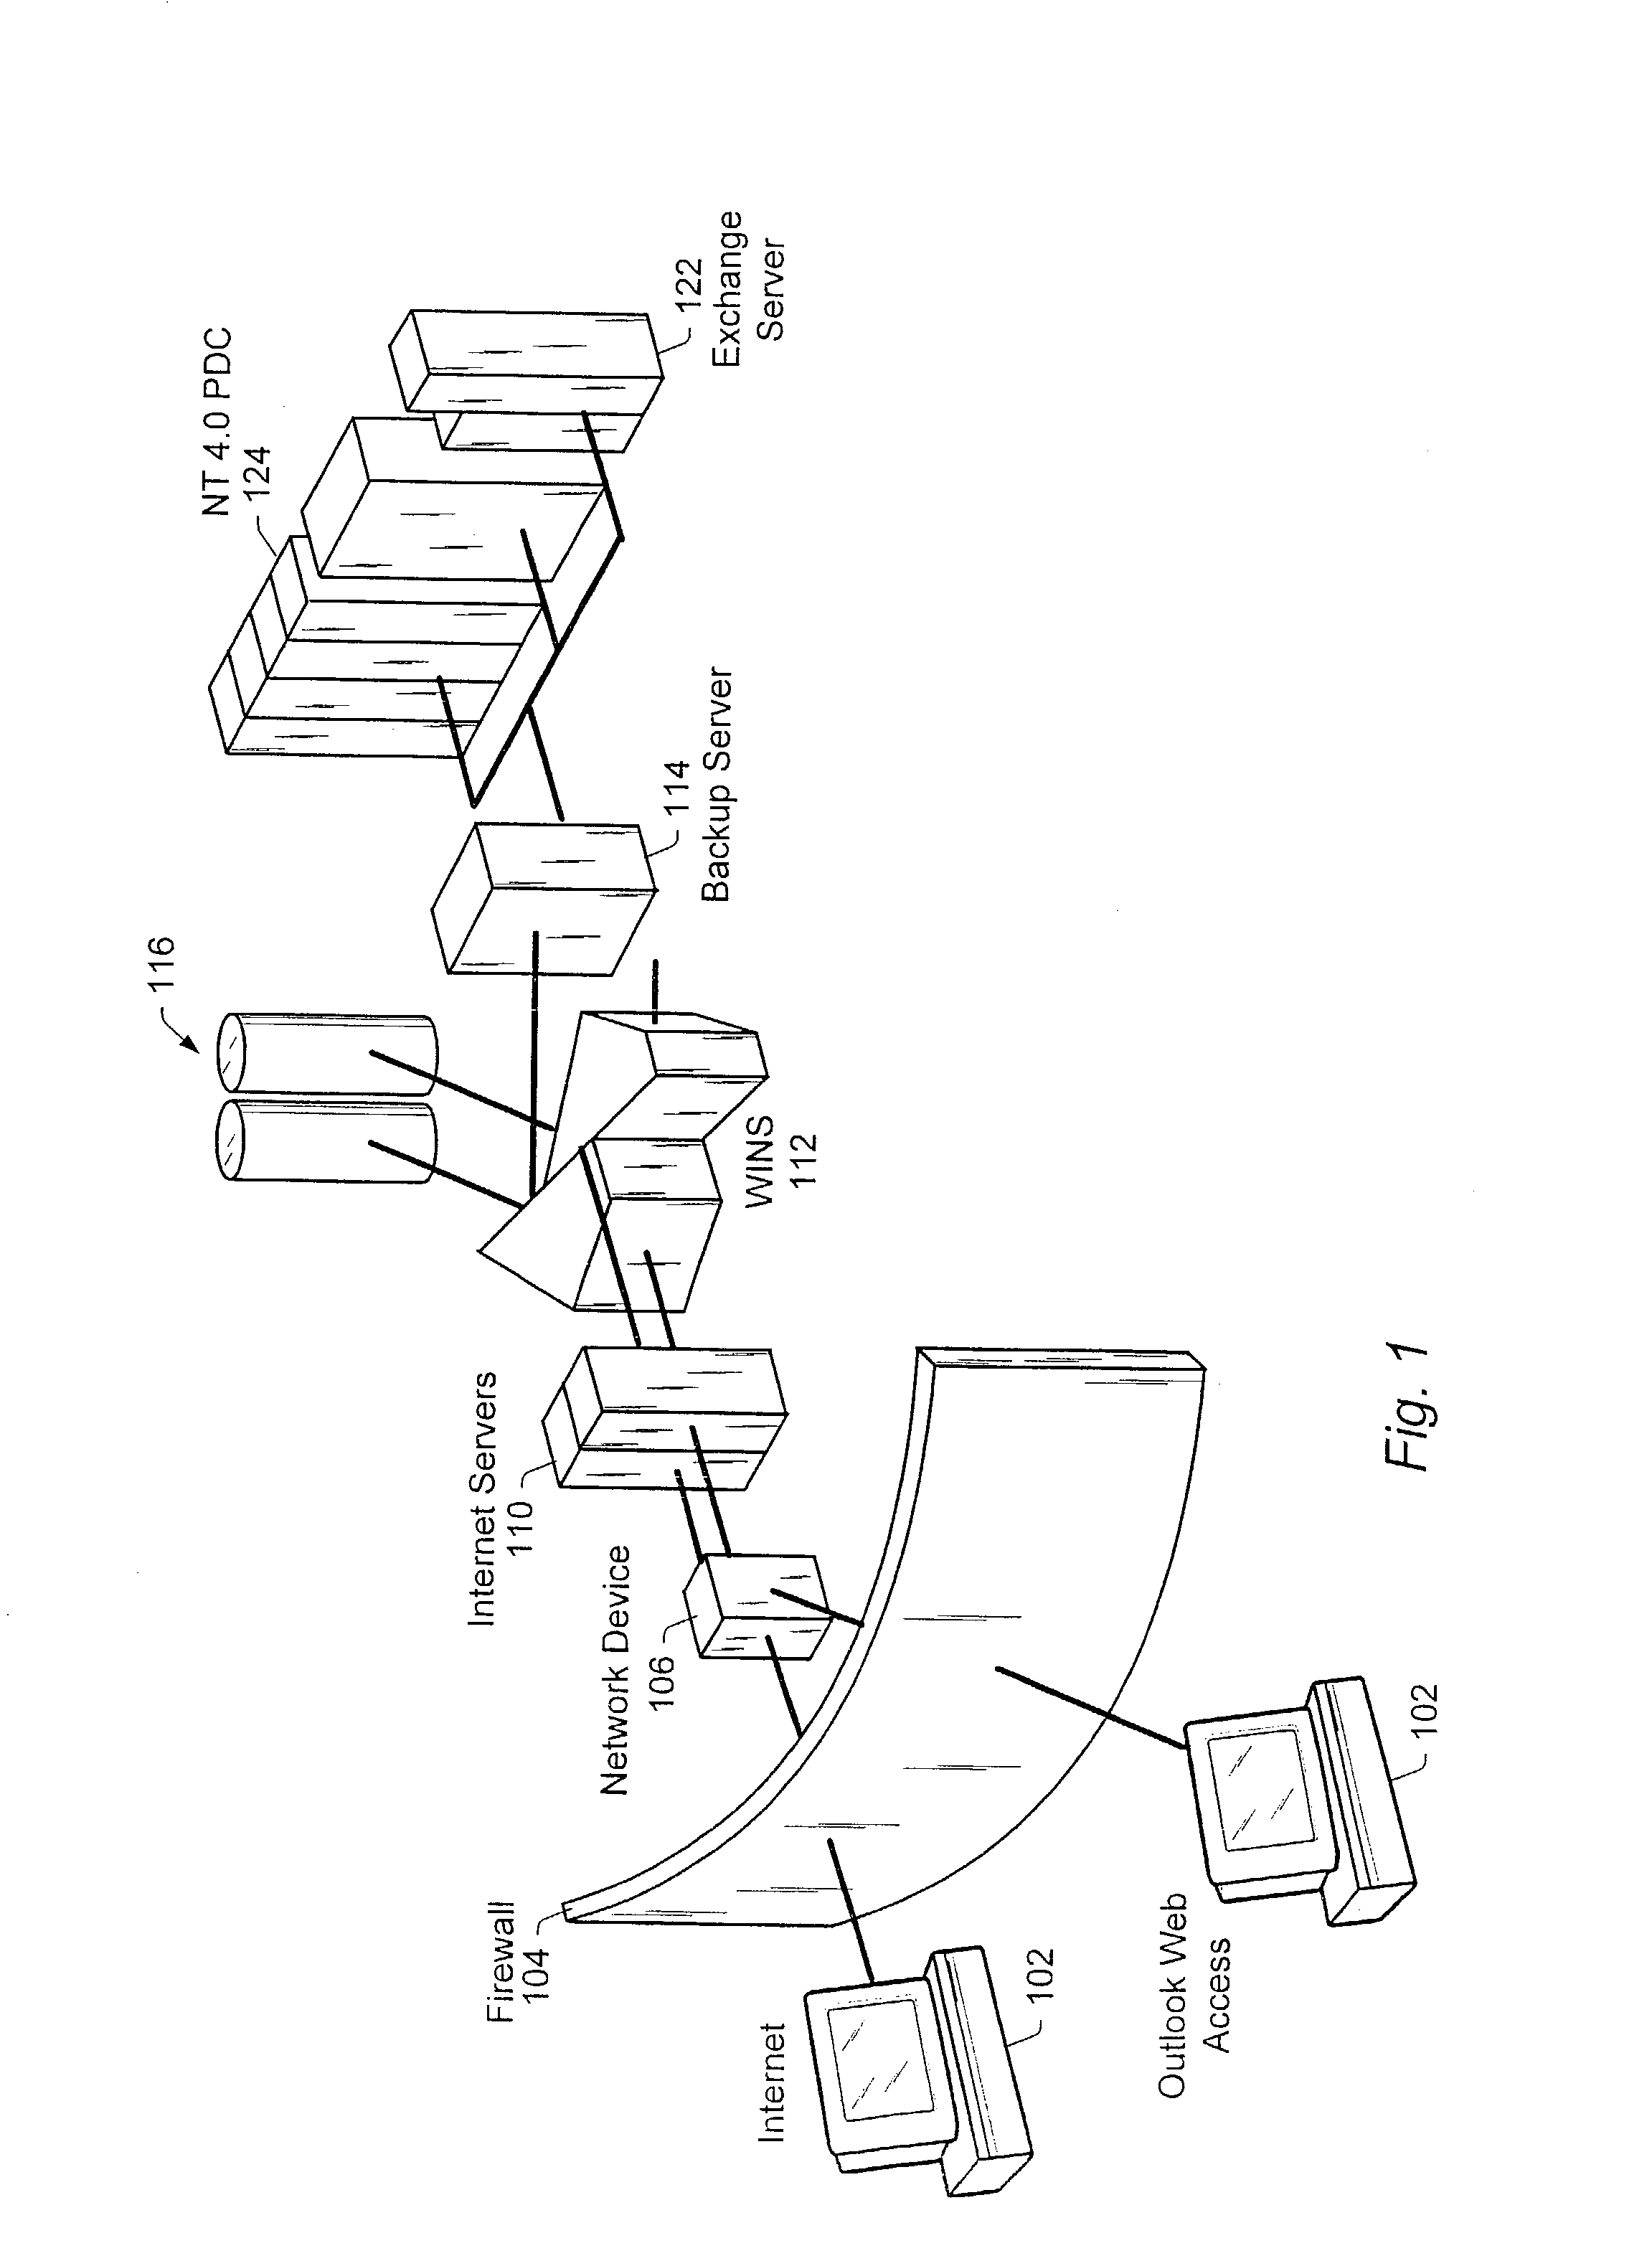 Generalized architecture for automatic storage configuration for diverse server applications